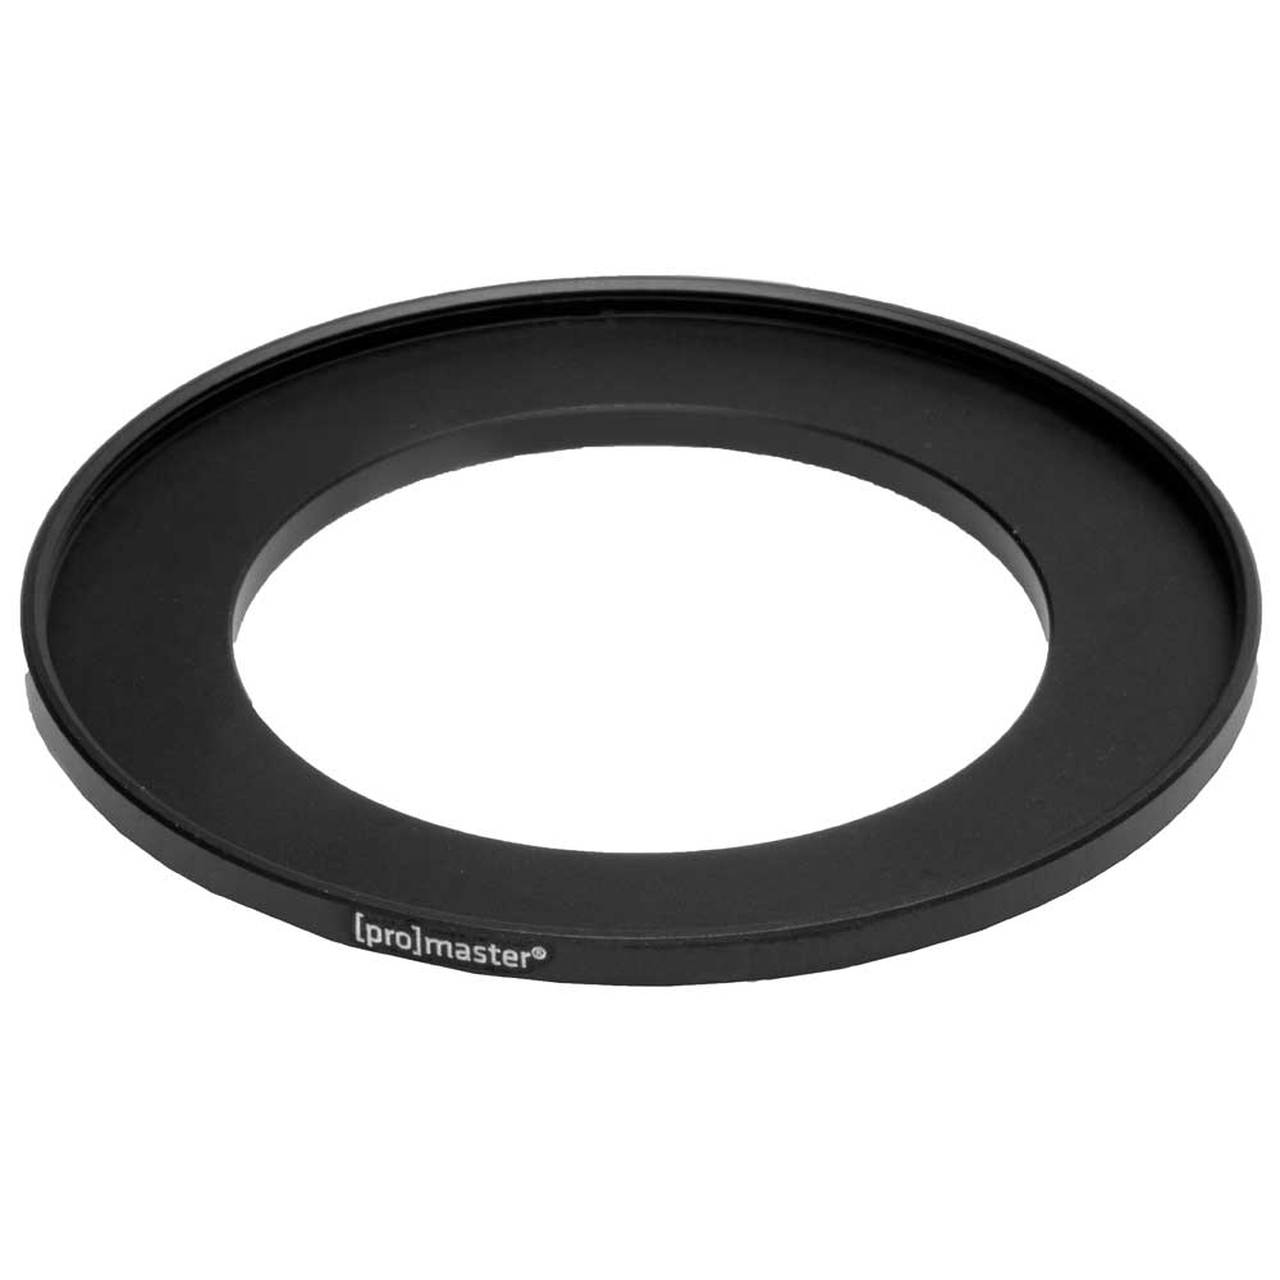 Promaster 4984 52-55mm Step-Up Ring